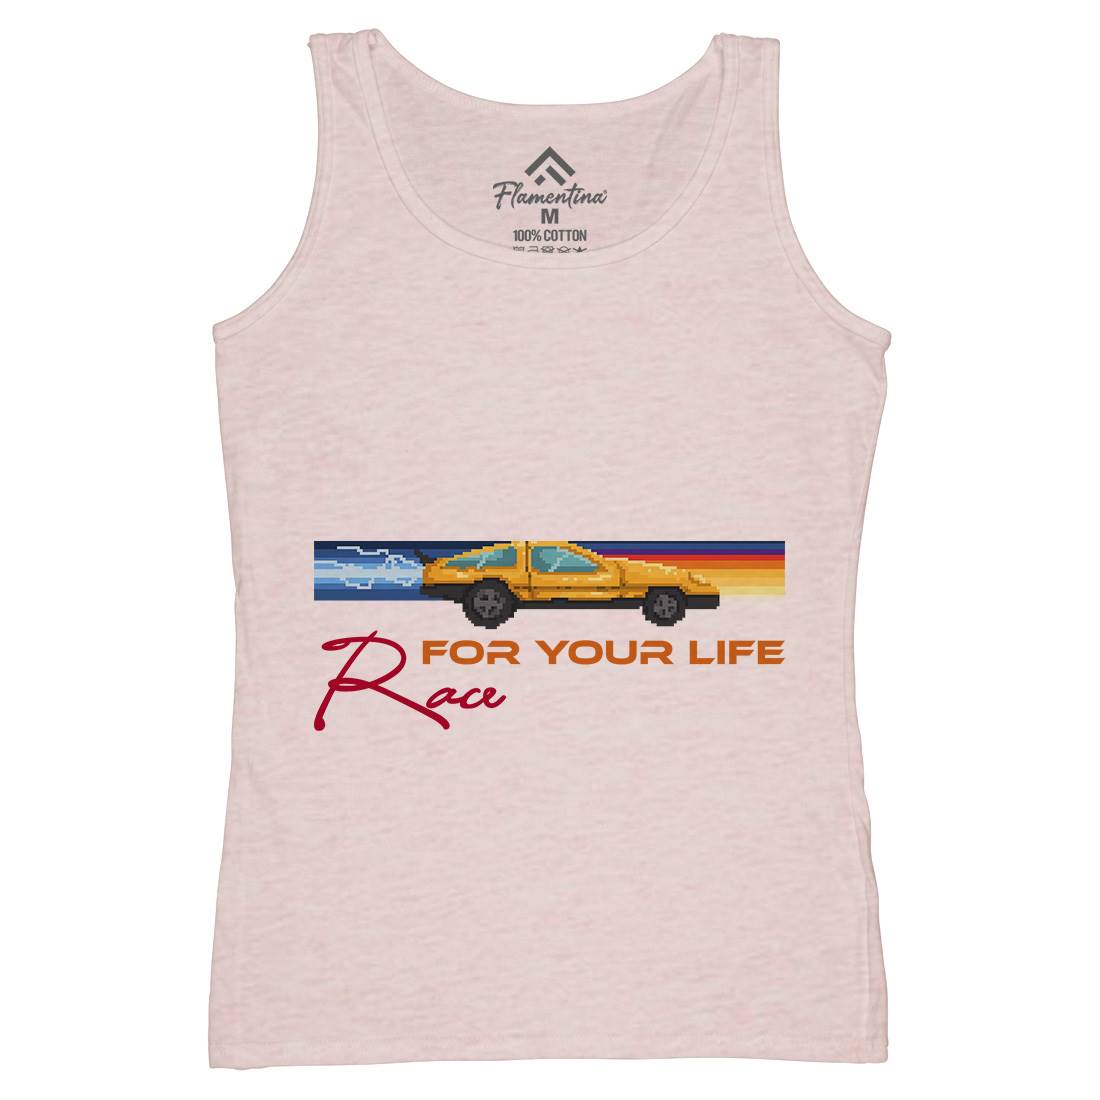 Race For Your Life Womens Organic Tank Top Vest Cars B951